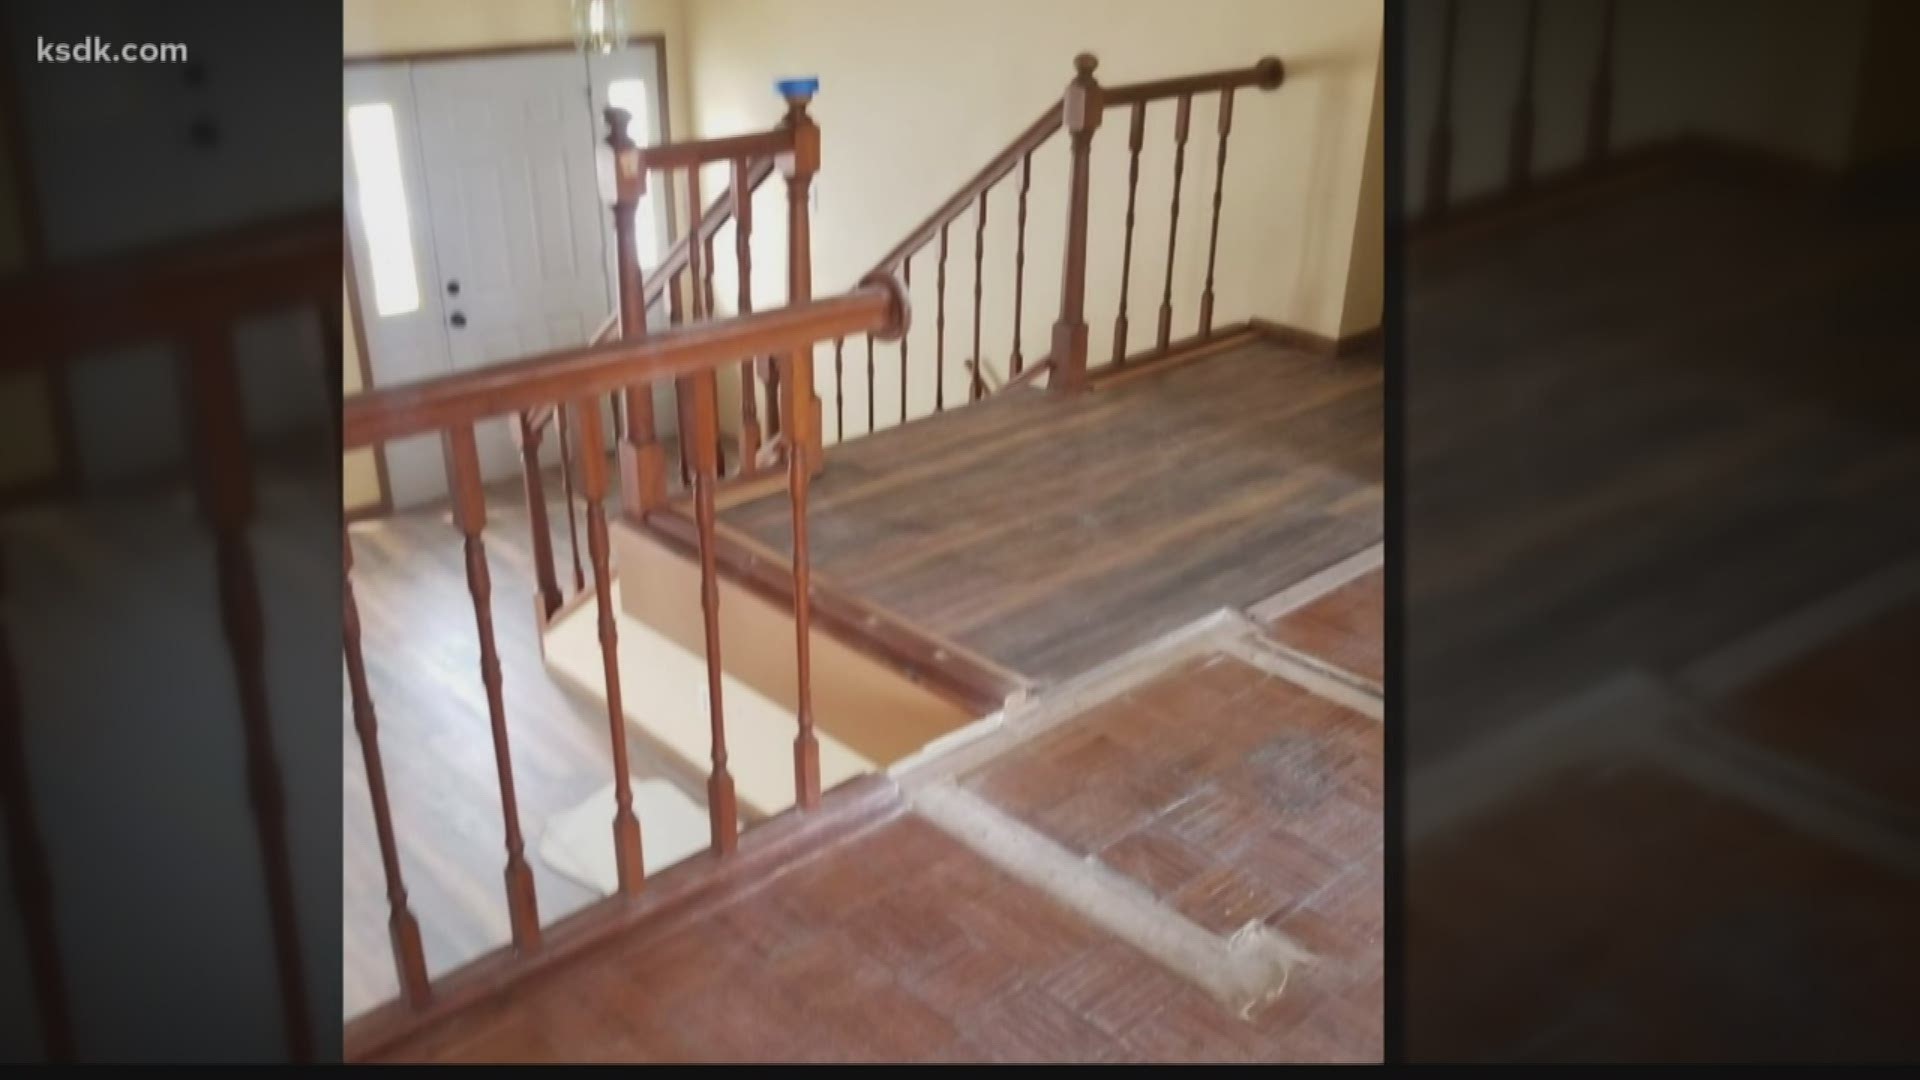 Craigslist contractor leaves trail of unfinished work ...